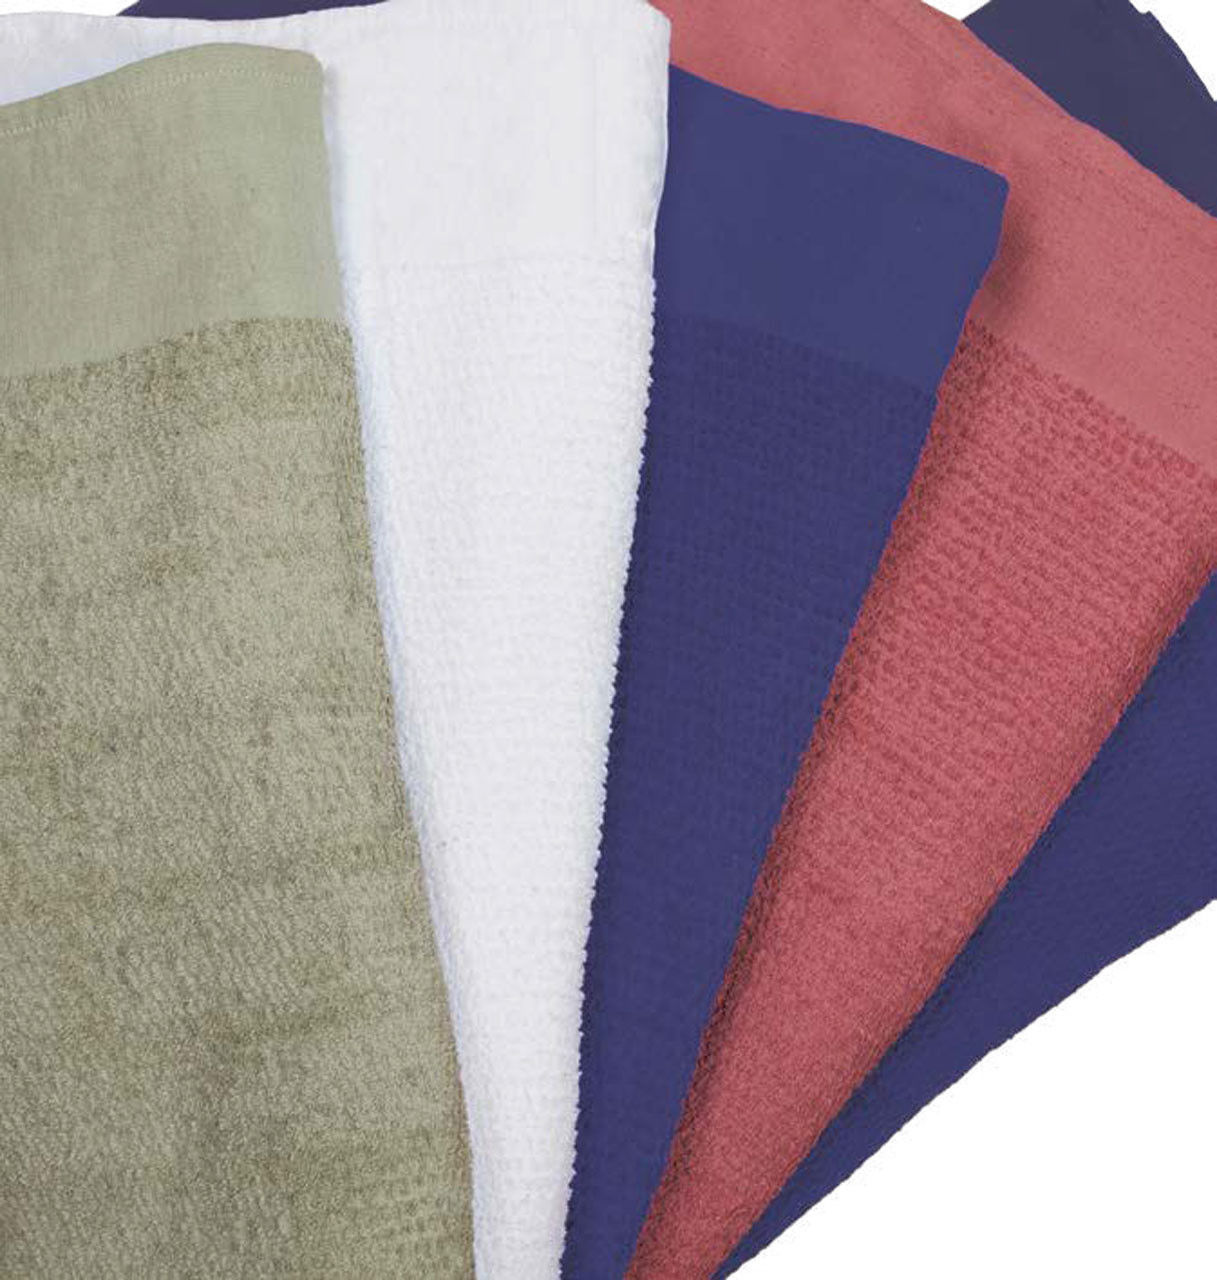 What is the weave of the terry cloth blanket used in Terry Hospital Blankets?